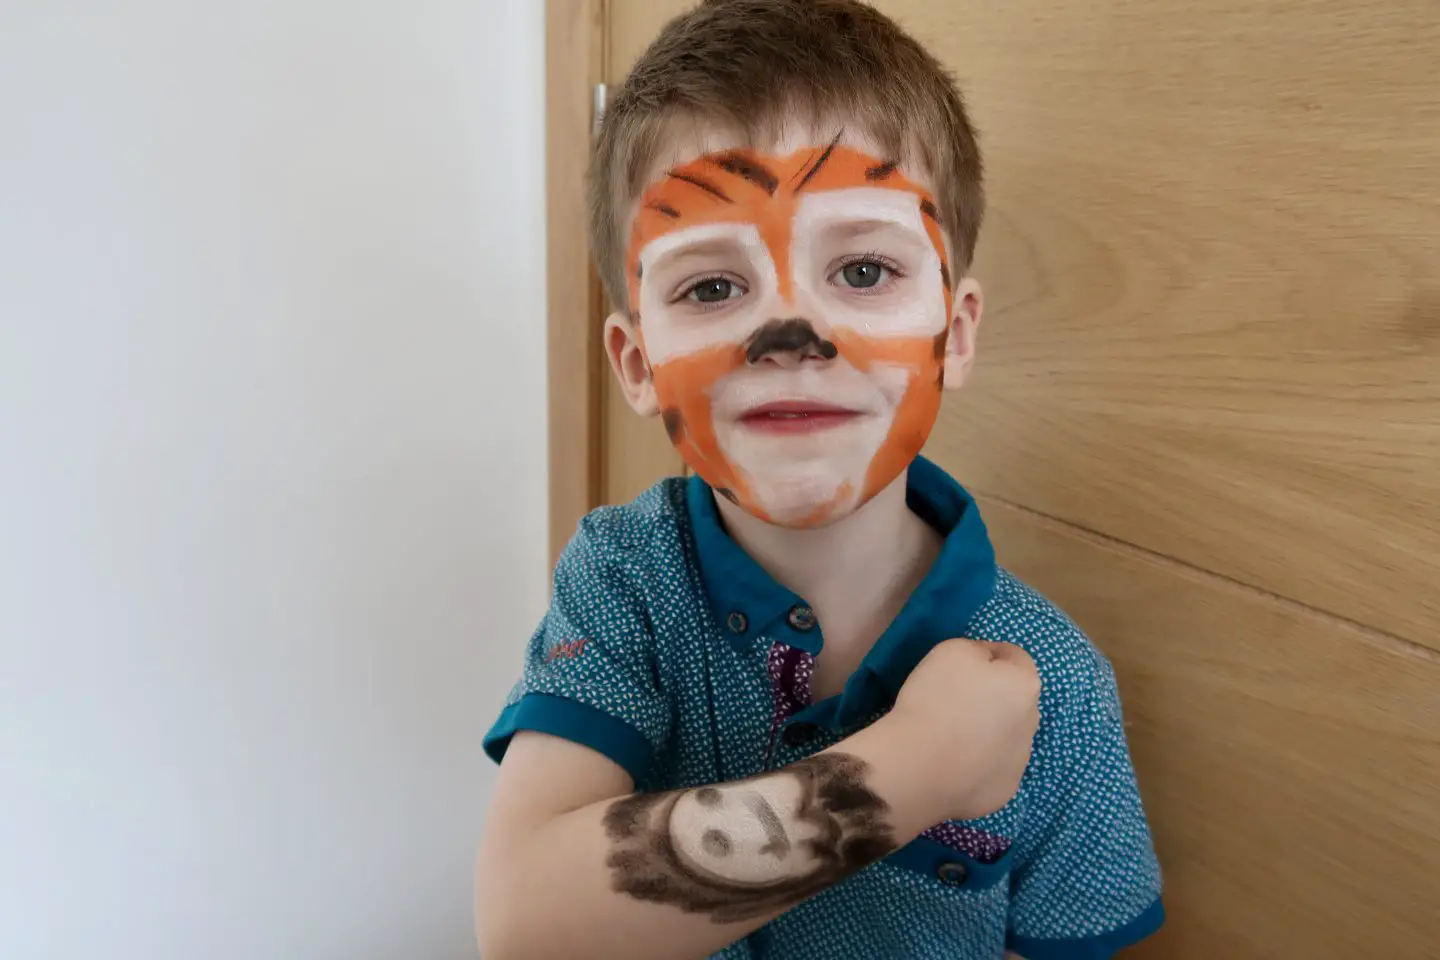 A little boy with his face painted as a tiger and a ghost painted on his arm.